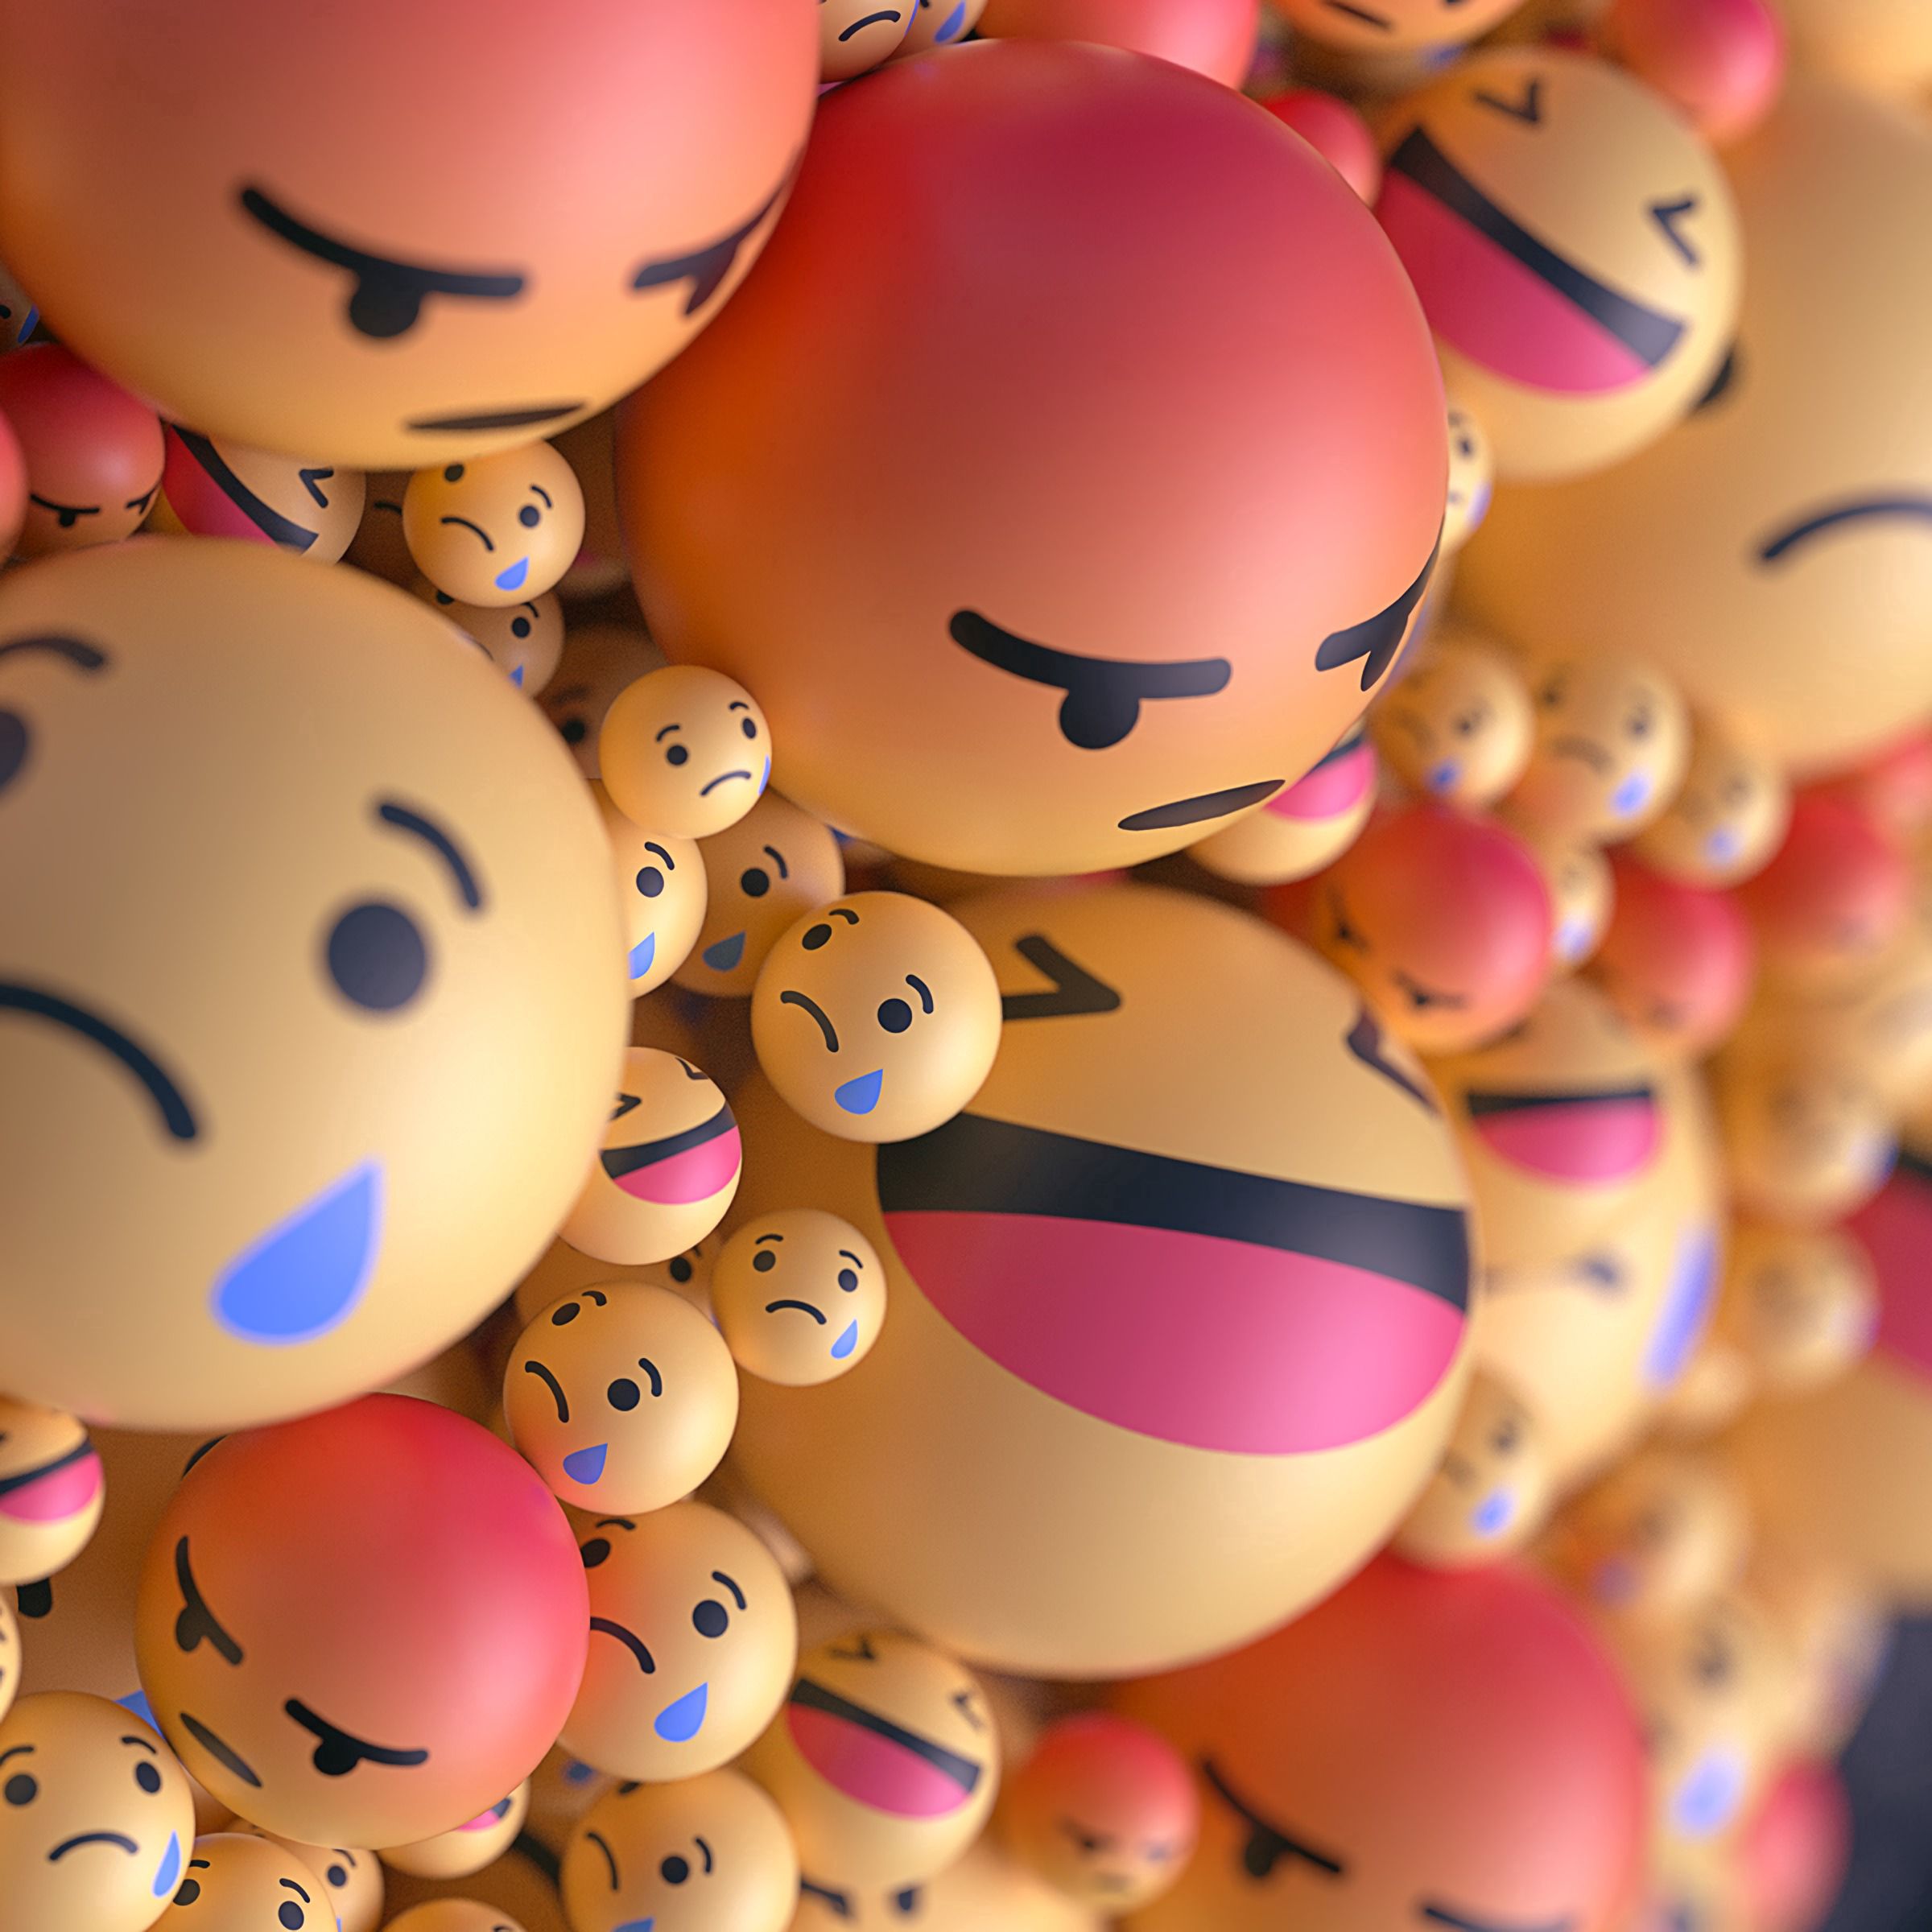 3d, smiles, emoticons, balloons, taw, smilies, smileys, emotions